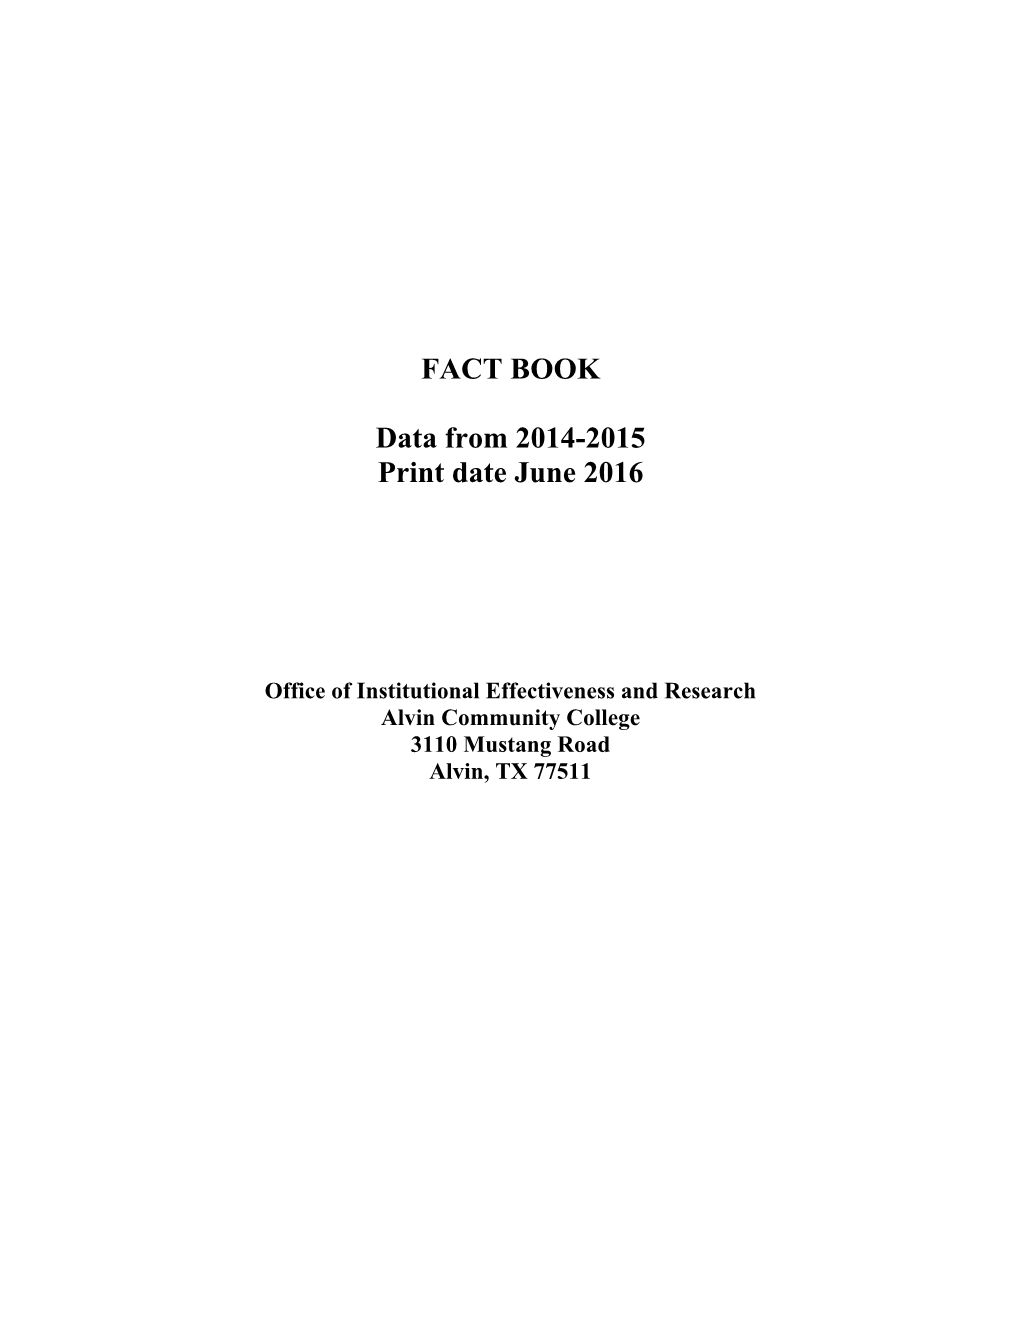 FACT BOOK Data from 2014-2015 Print